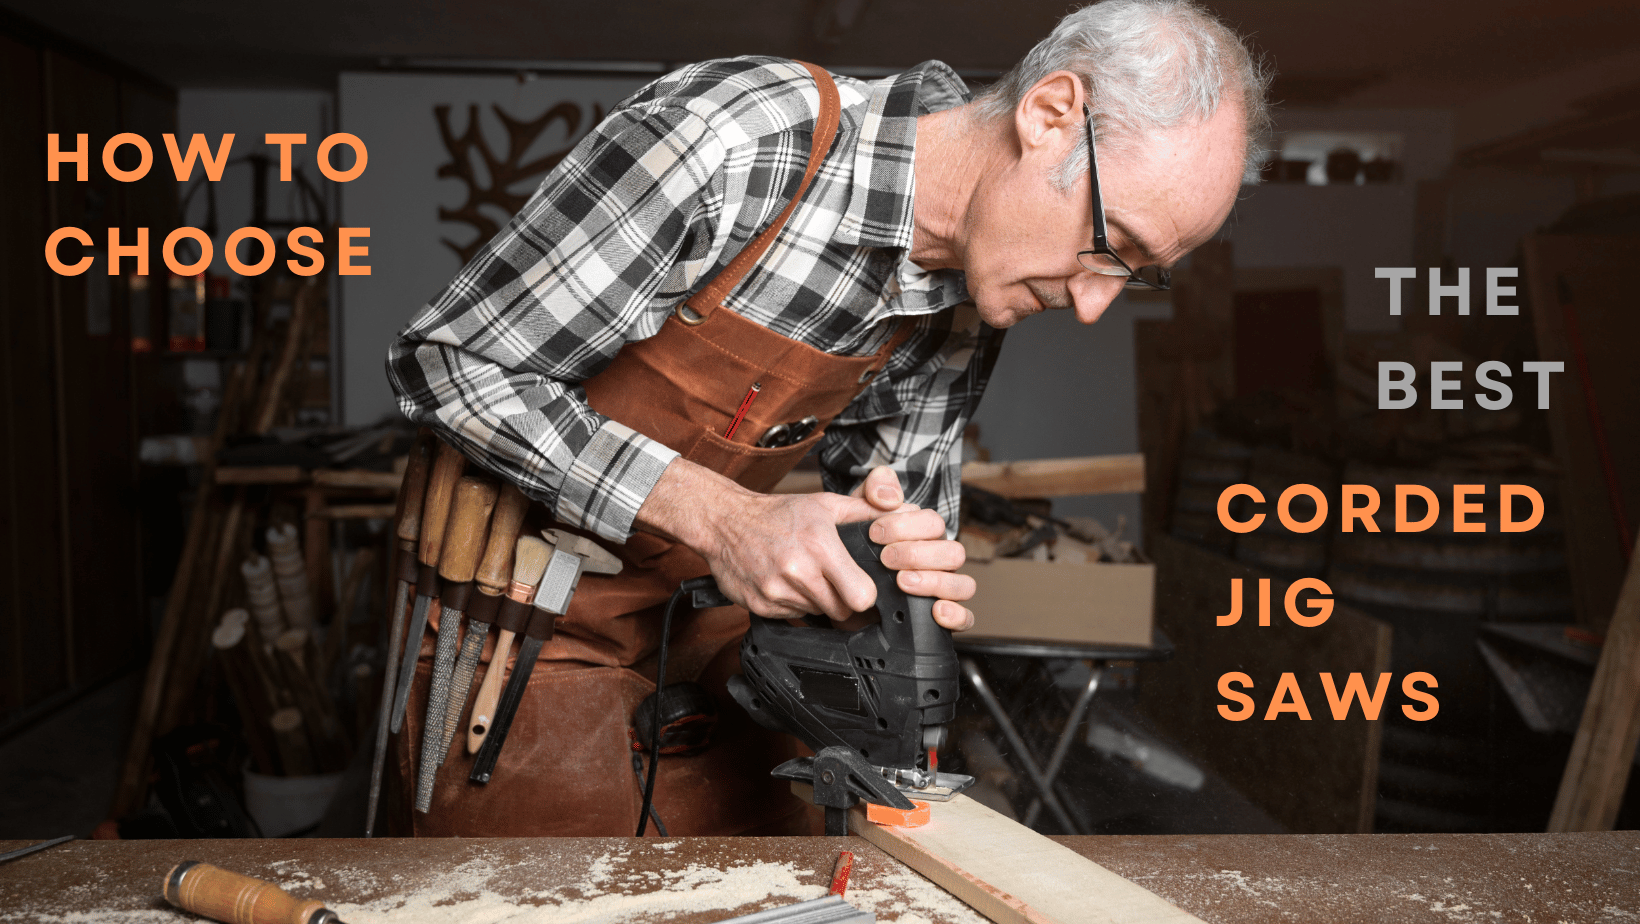 The 5 Best Corded Jig Saws (And Why)